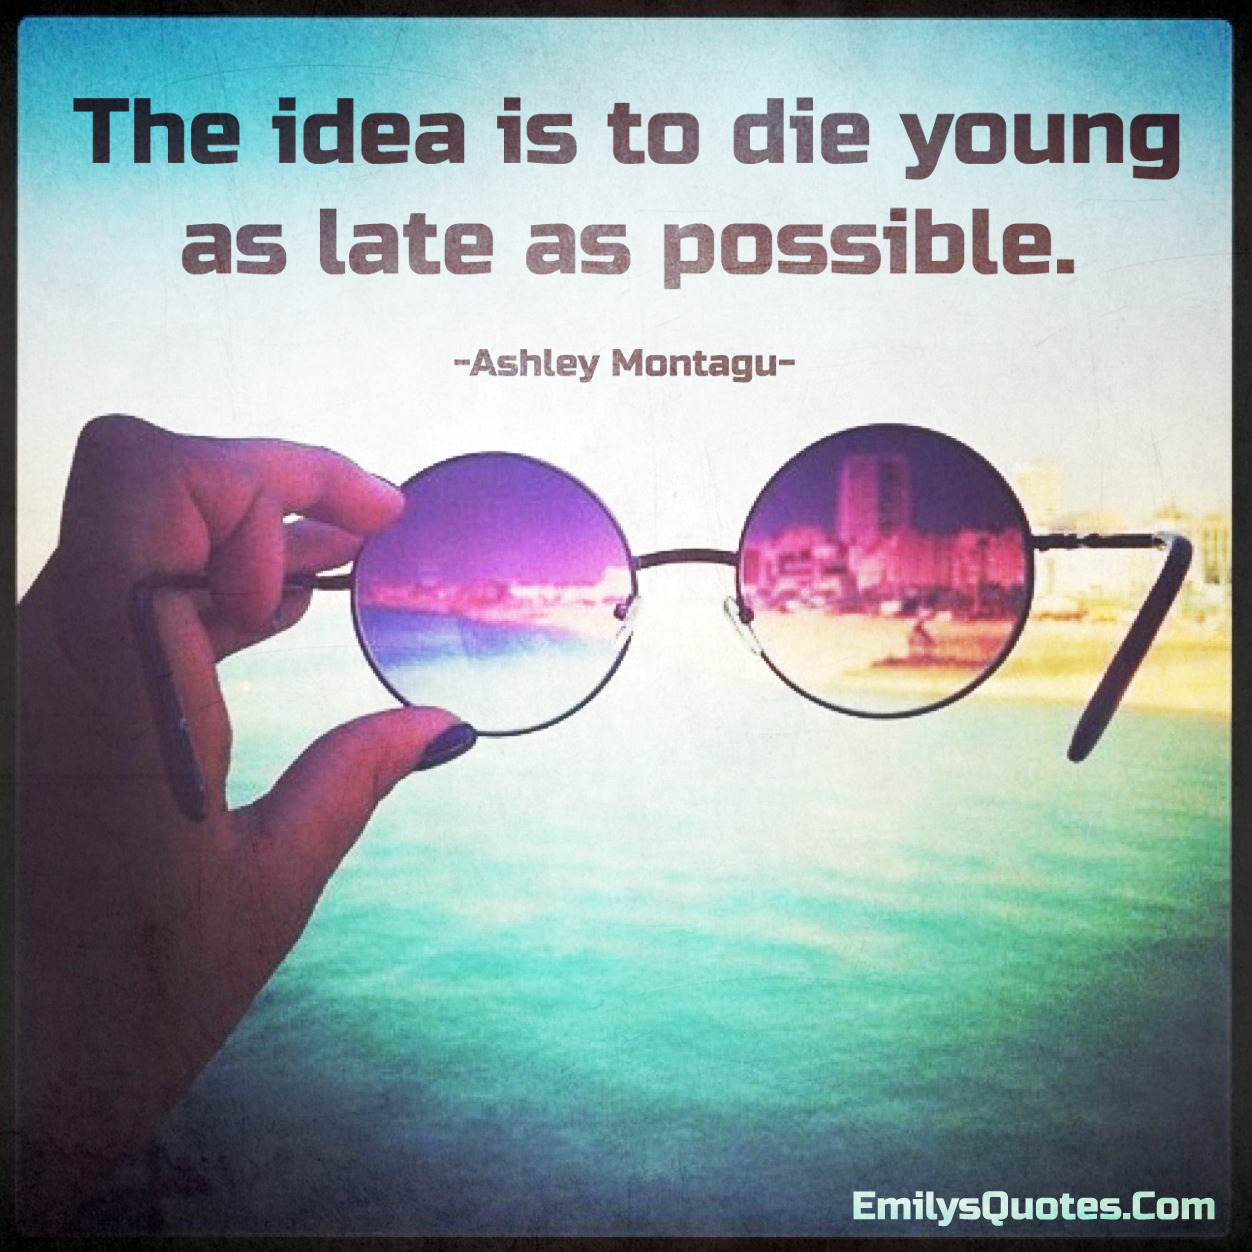 The idea is to die young as late as possible